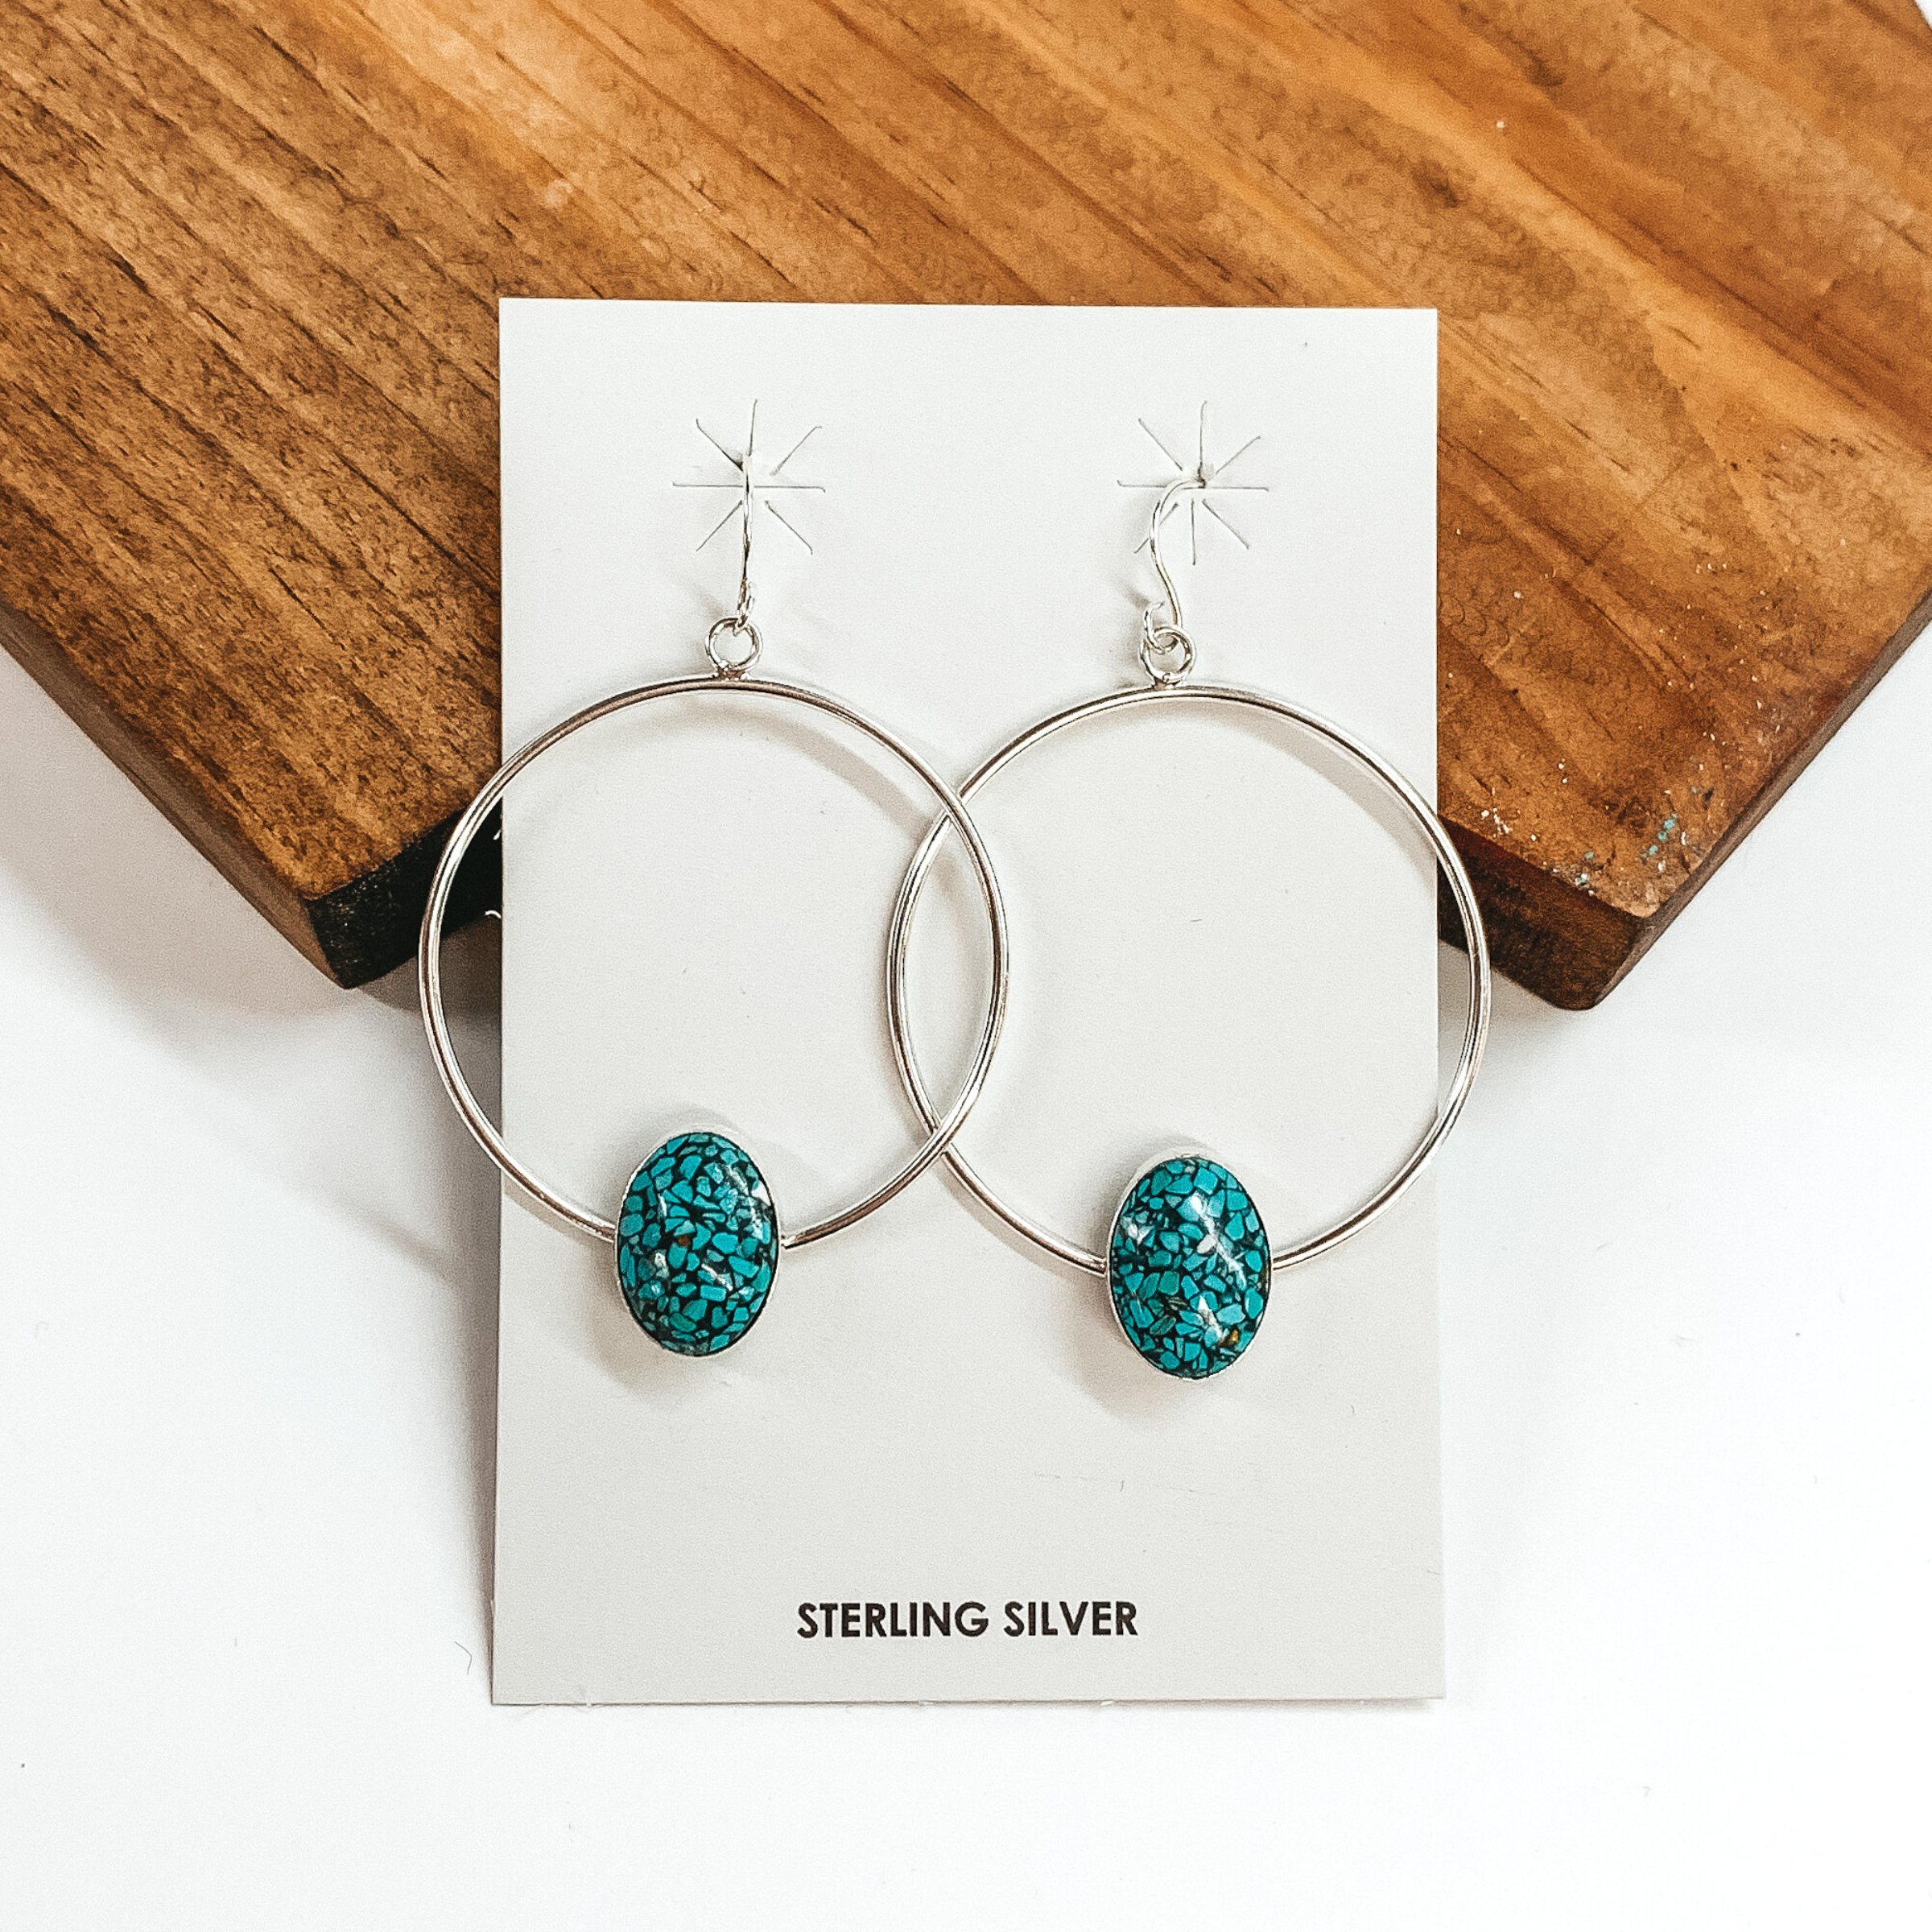 Merle House | Navajo Handmade Sterling Silver Hoop Earrings with Oval Kingman Turquoise Stone - Giddy Up Glamour Boutique